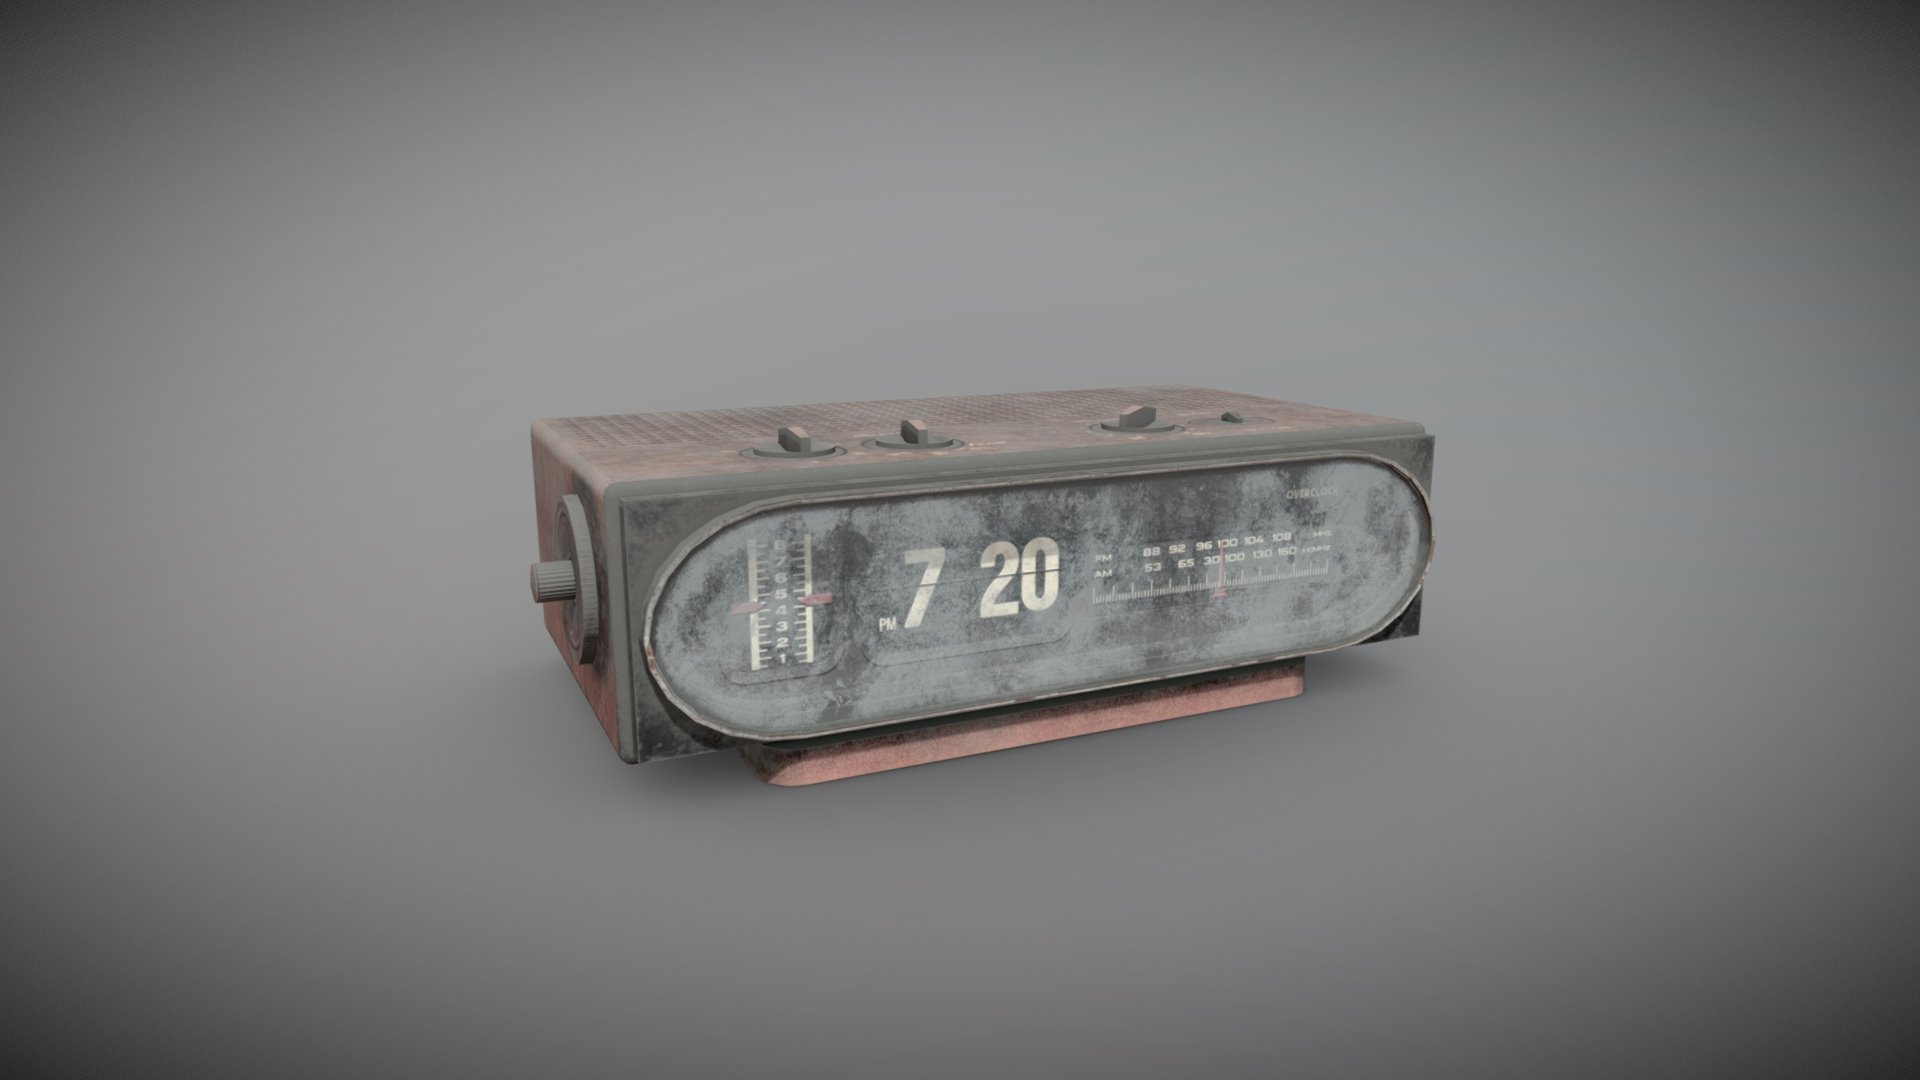 3D model Dirty desktop flipclock 20 of 20 - This is a 3D model of the Dirty desktop flipclock 20 of 20. The 3D model is about a close-up of a metal object.